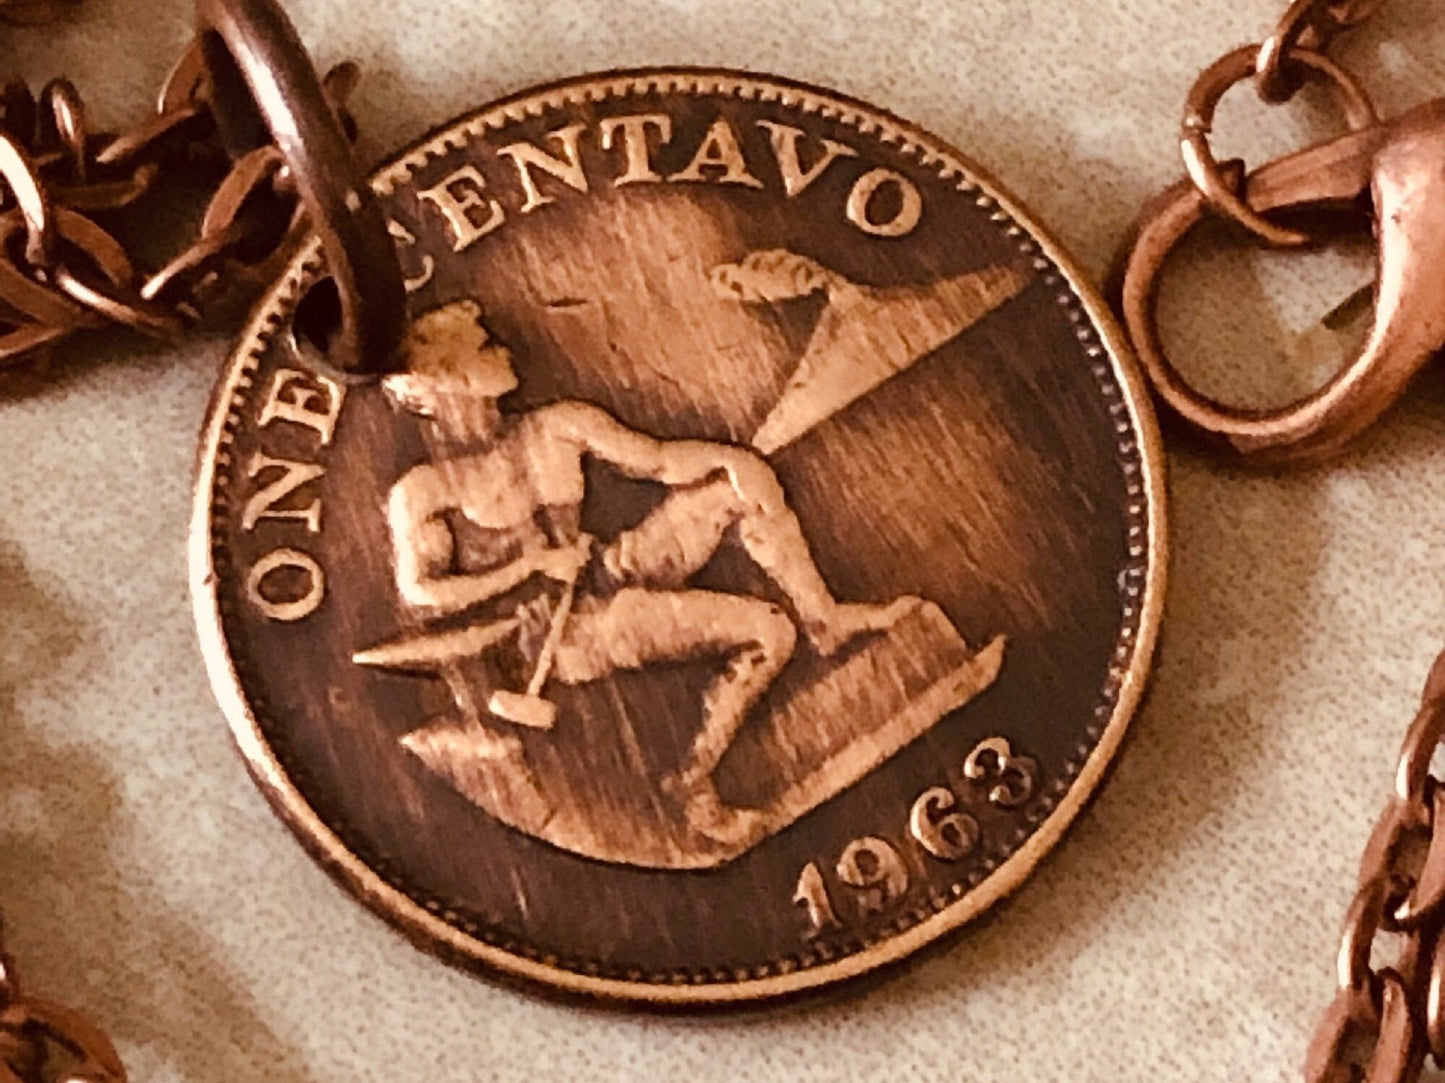 Philippines Coin Necklace Pendant Pilipinas One Centavo Personal Vintage Handmade Jewelry Gift Friend Charm For Him Her World Coin Collector